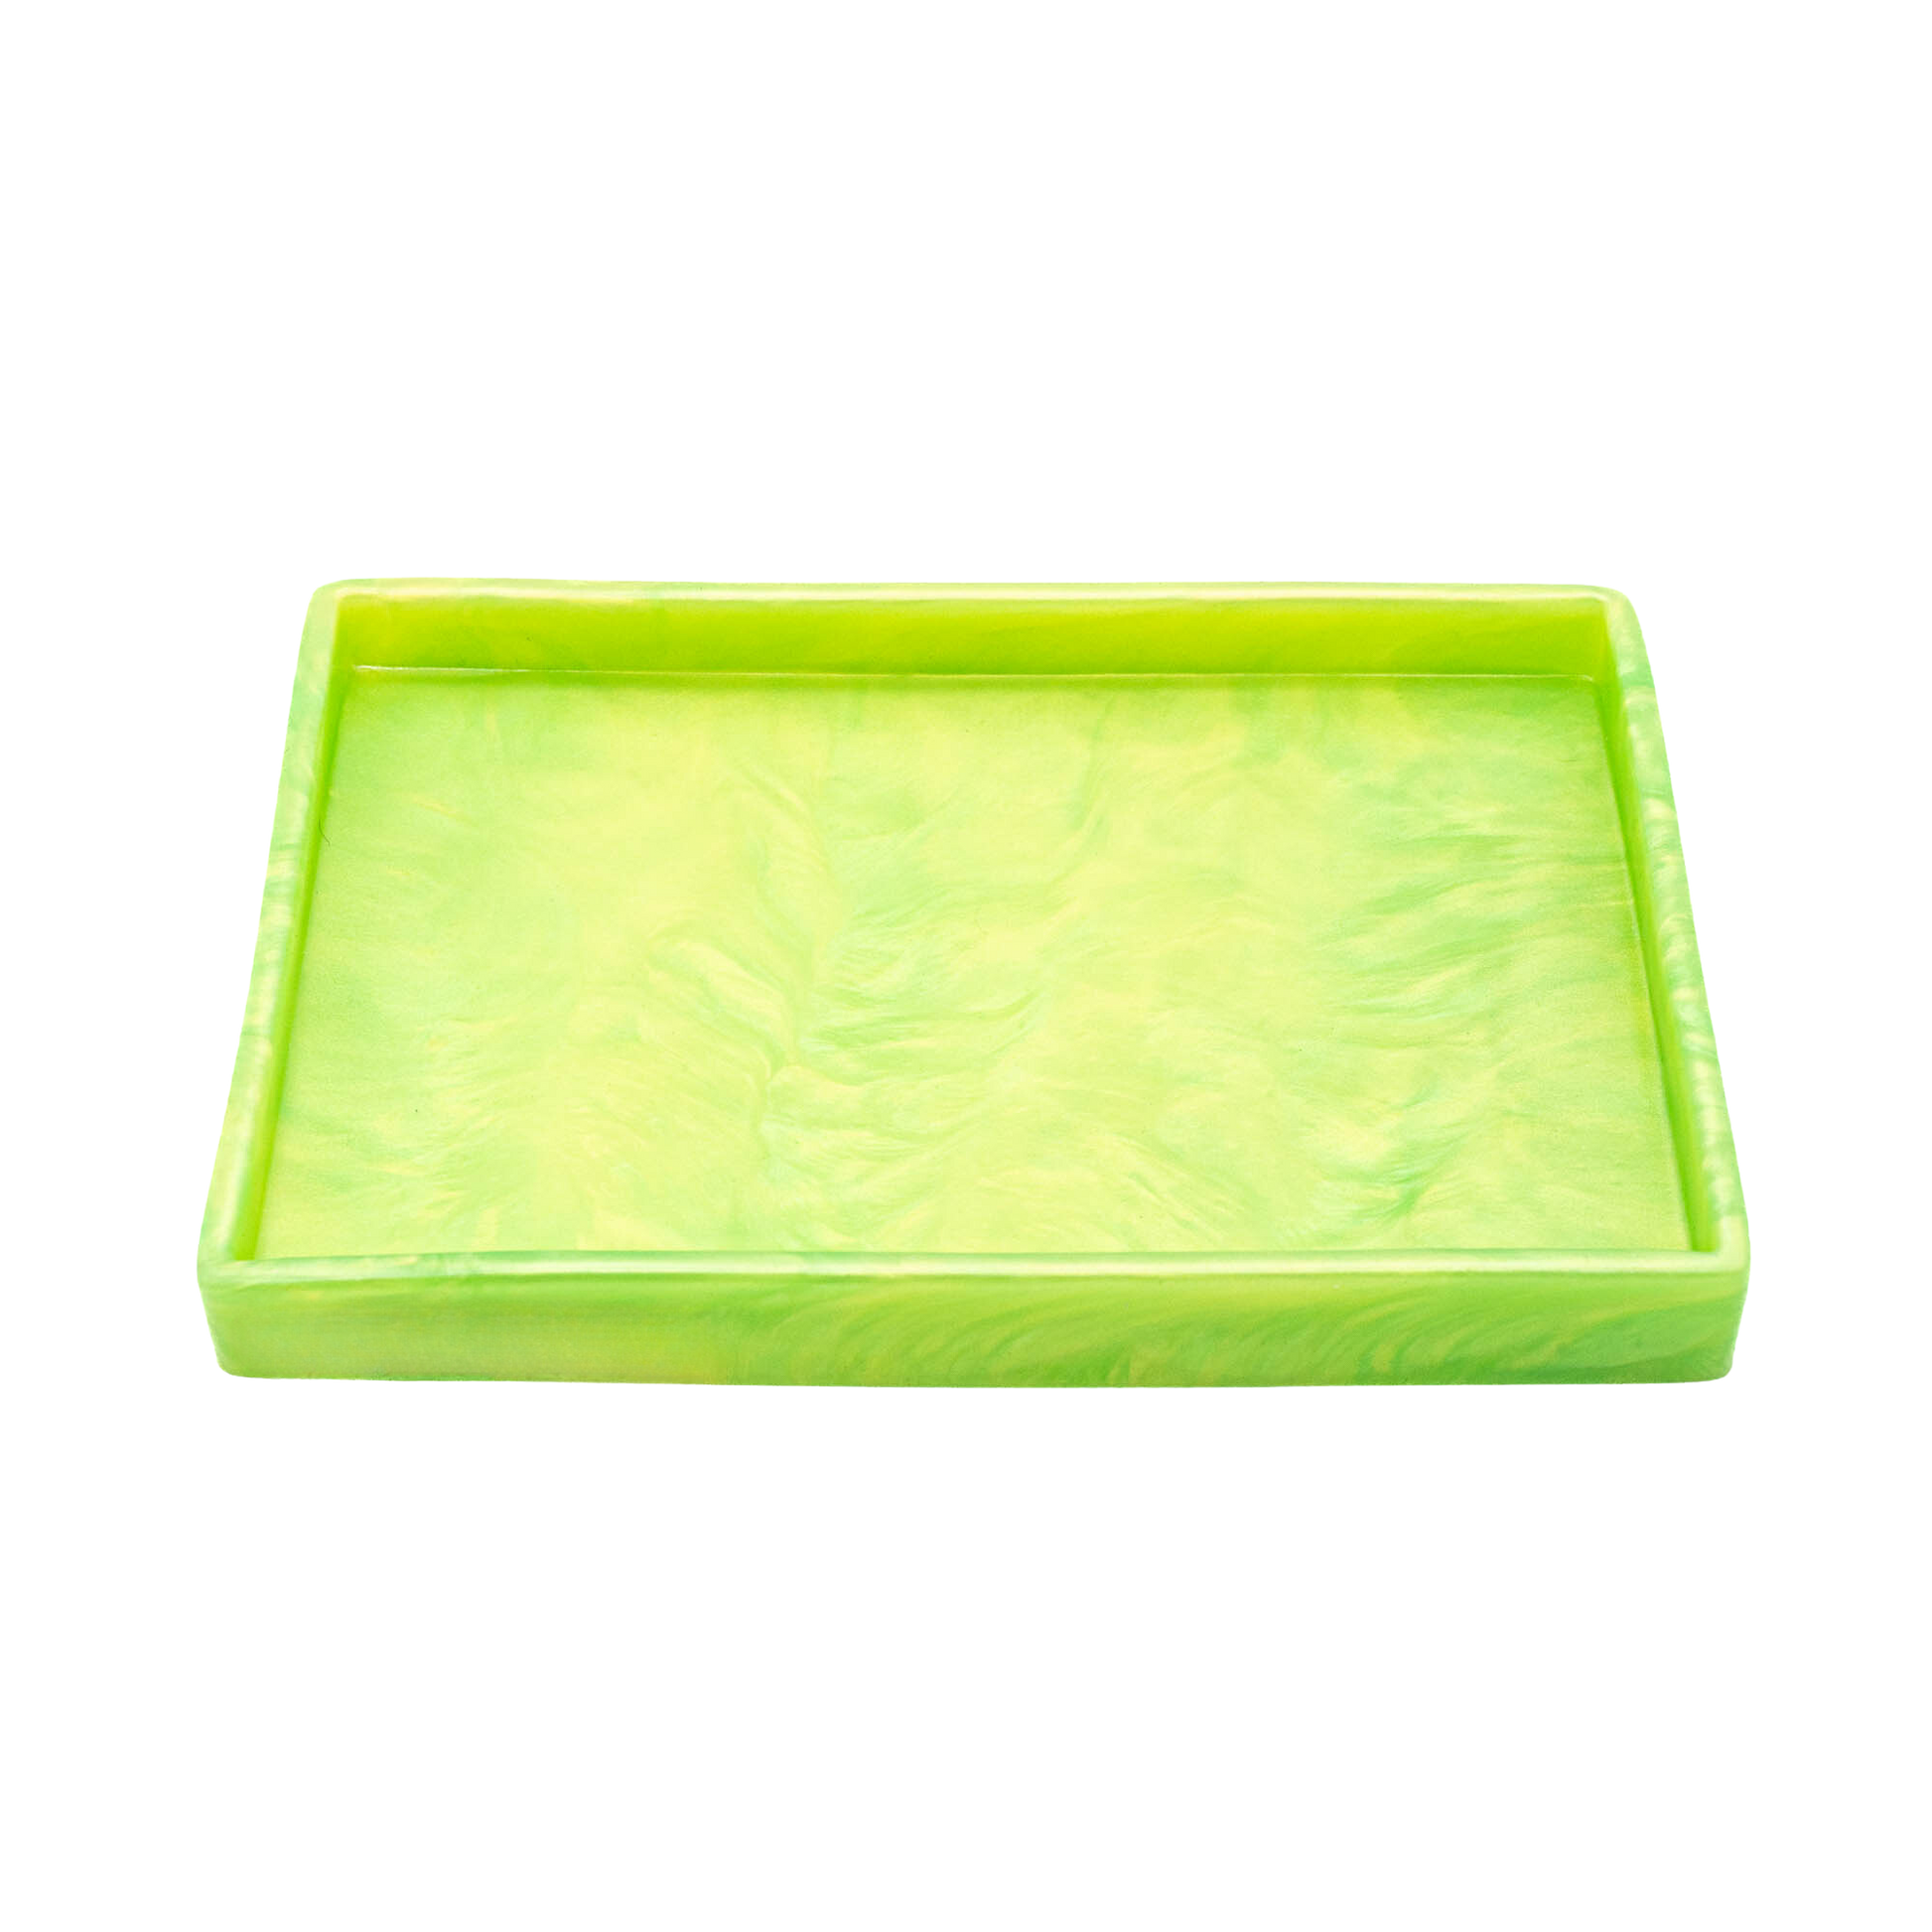 Decorative tray. Our decorative trays are made of platinum-grade silicone. Our decorative trays are heat resistant and dishwasher safe. 